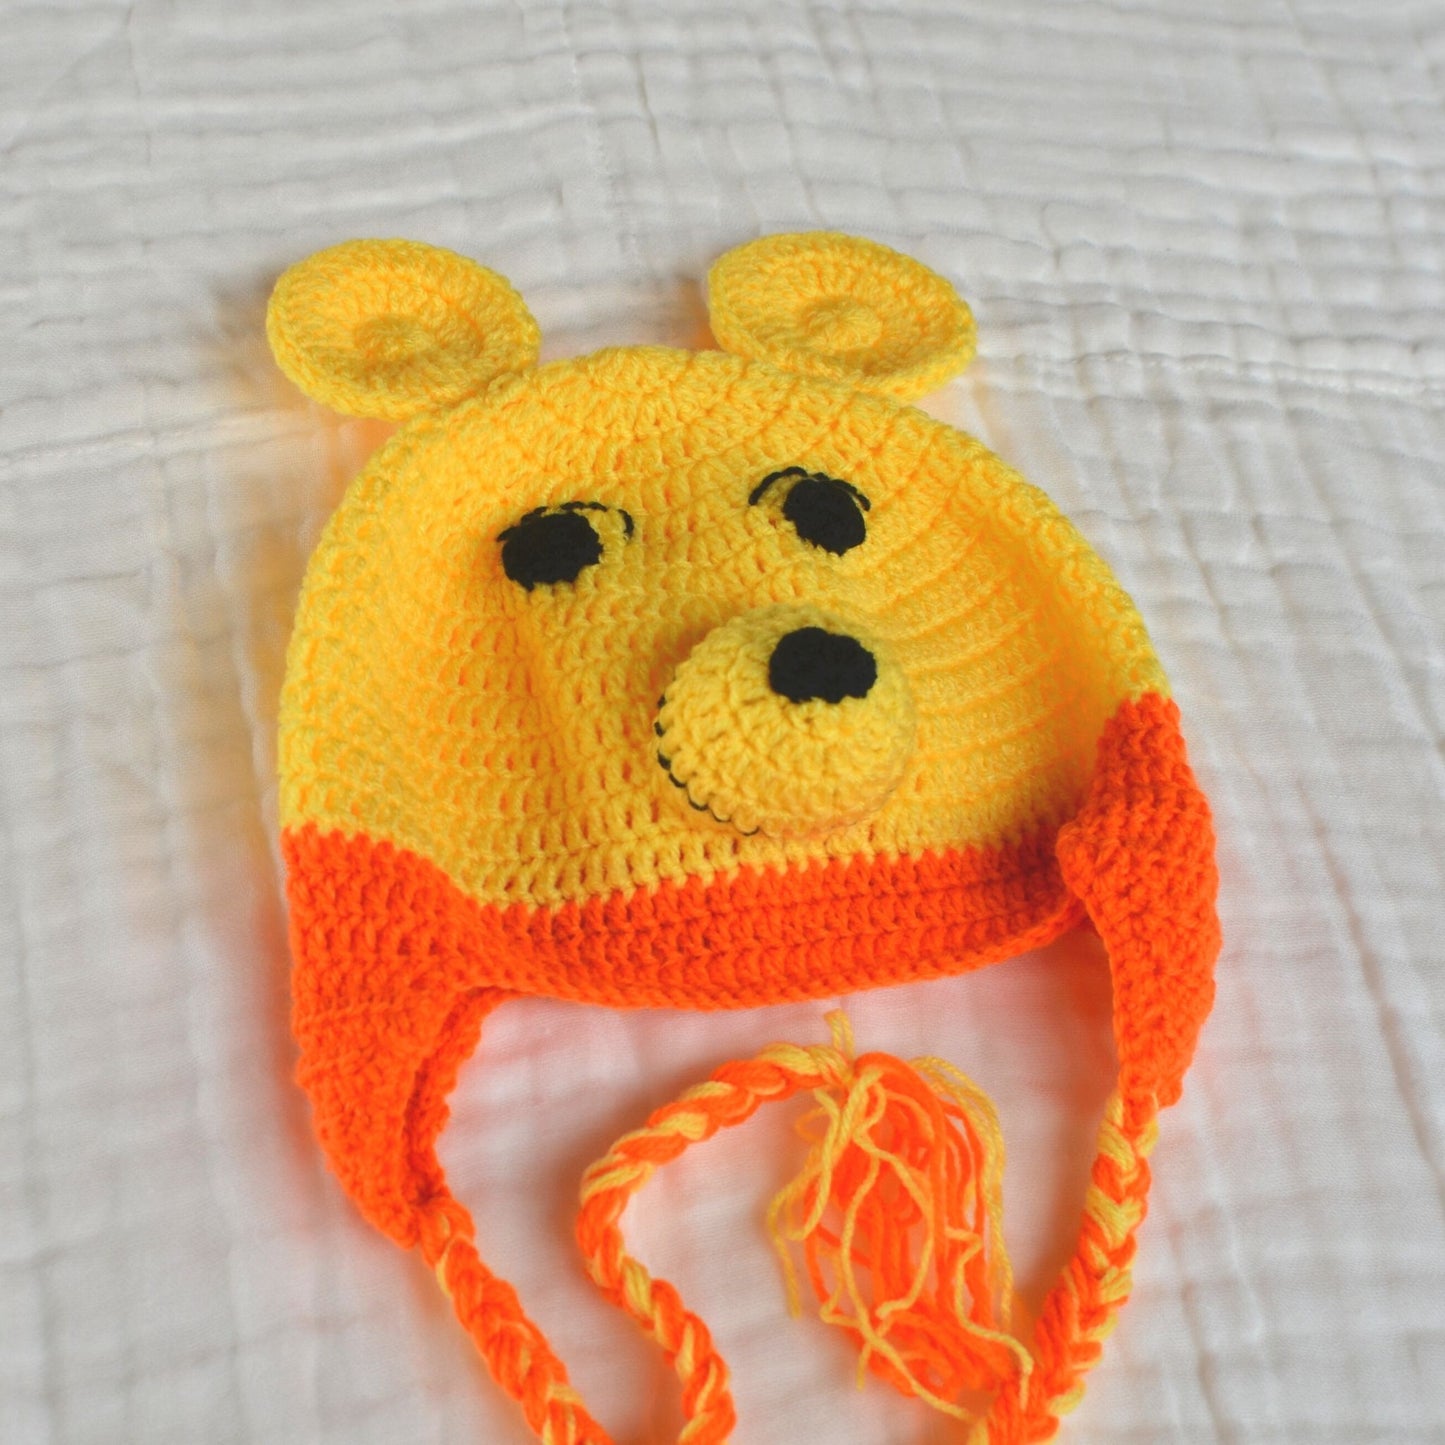 Knitted / Crochet Baby Animal Hats - Toddler Size